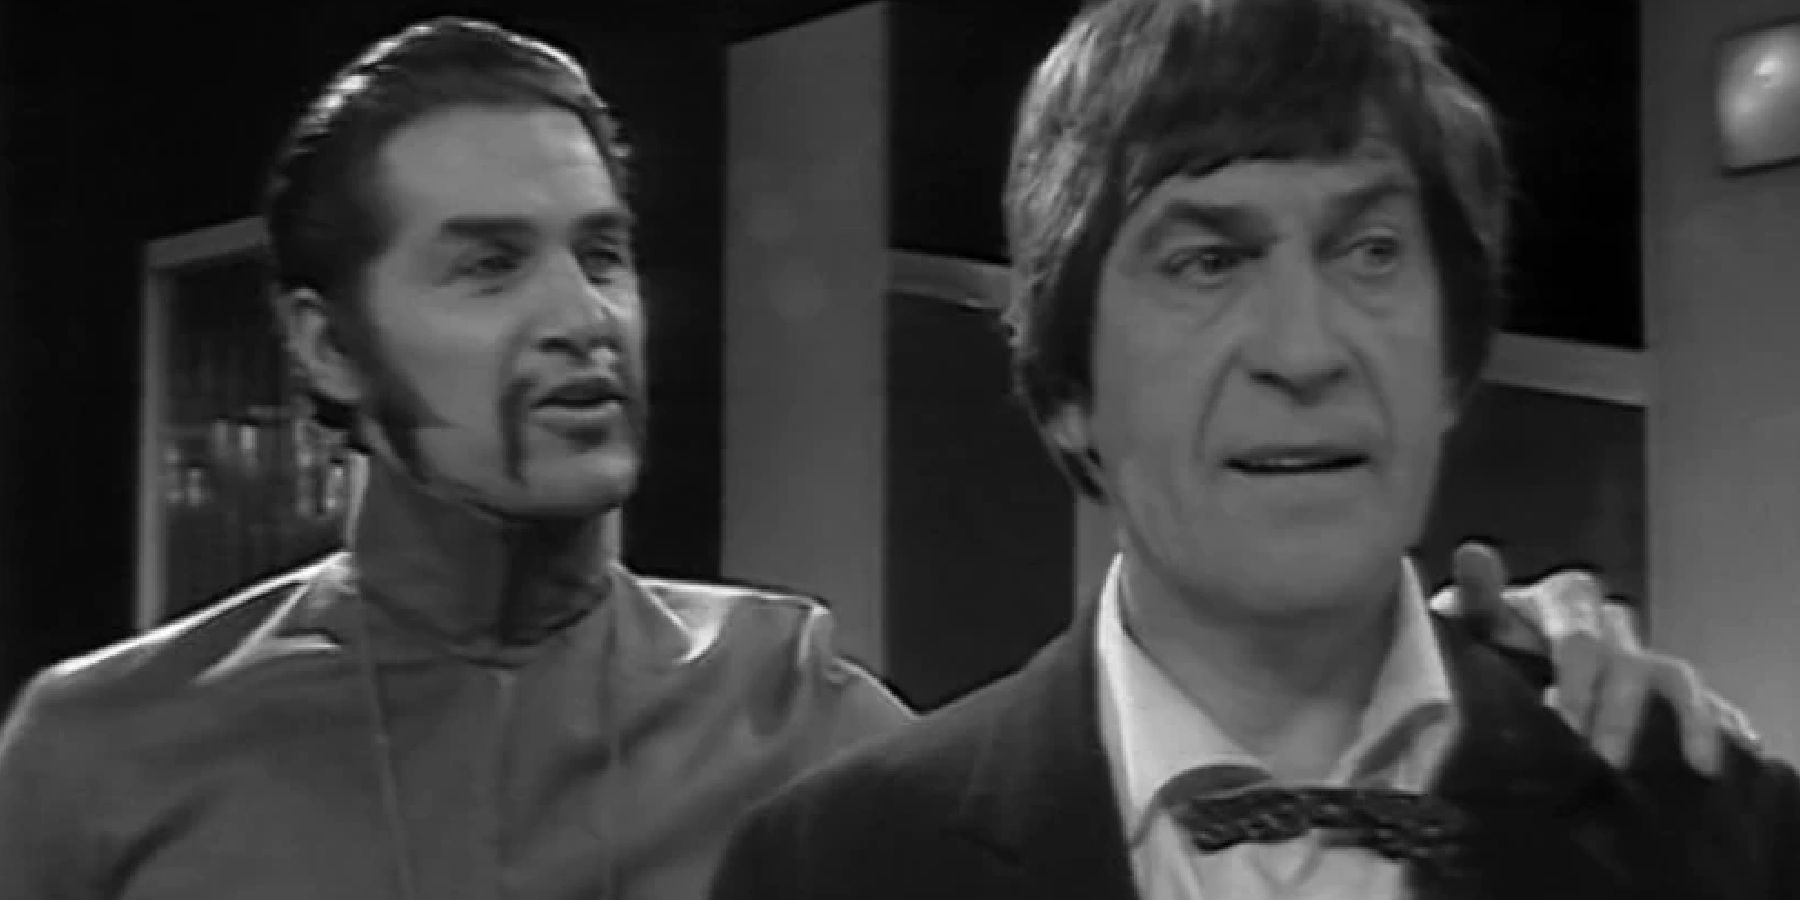 Doctor Who Theory: The Master Secretly Debuted 2 Years Early & Caused The Second Doctor's Regeneration